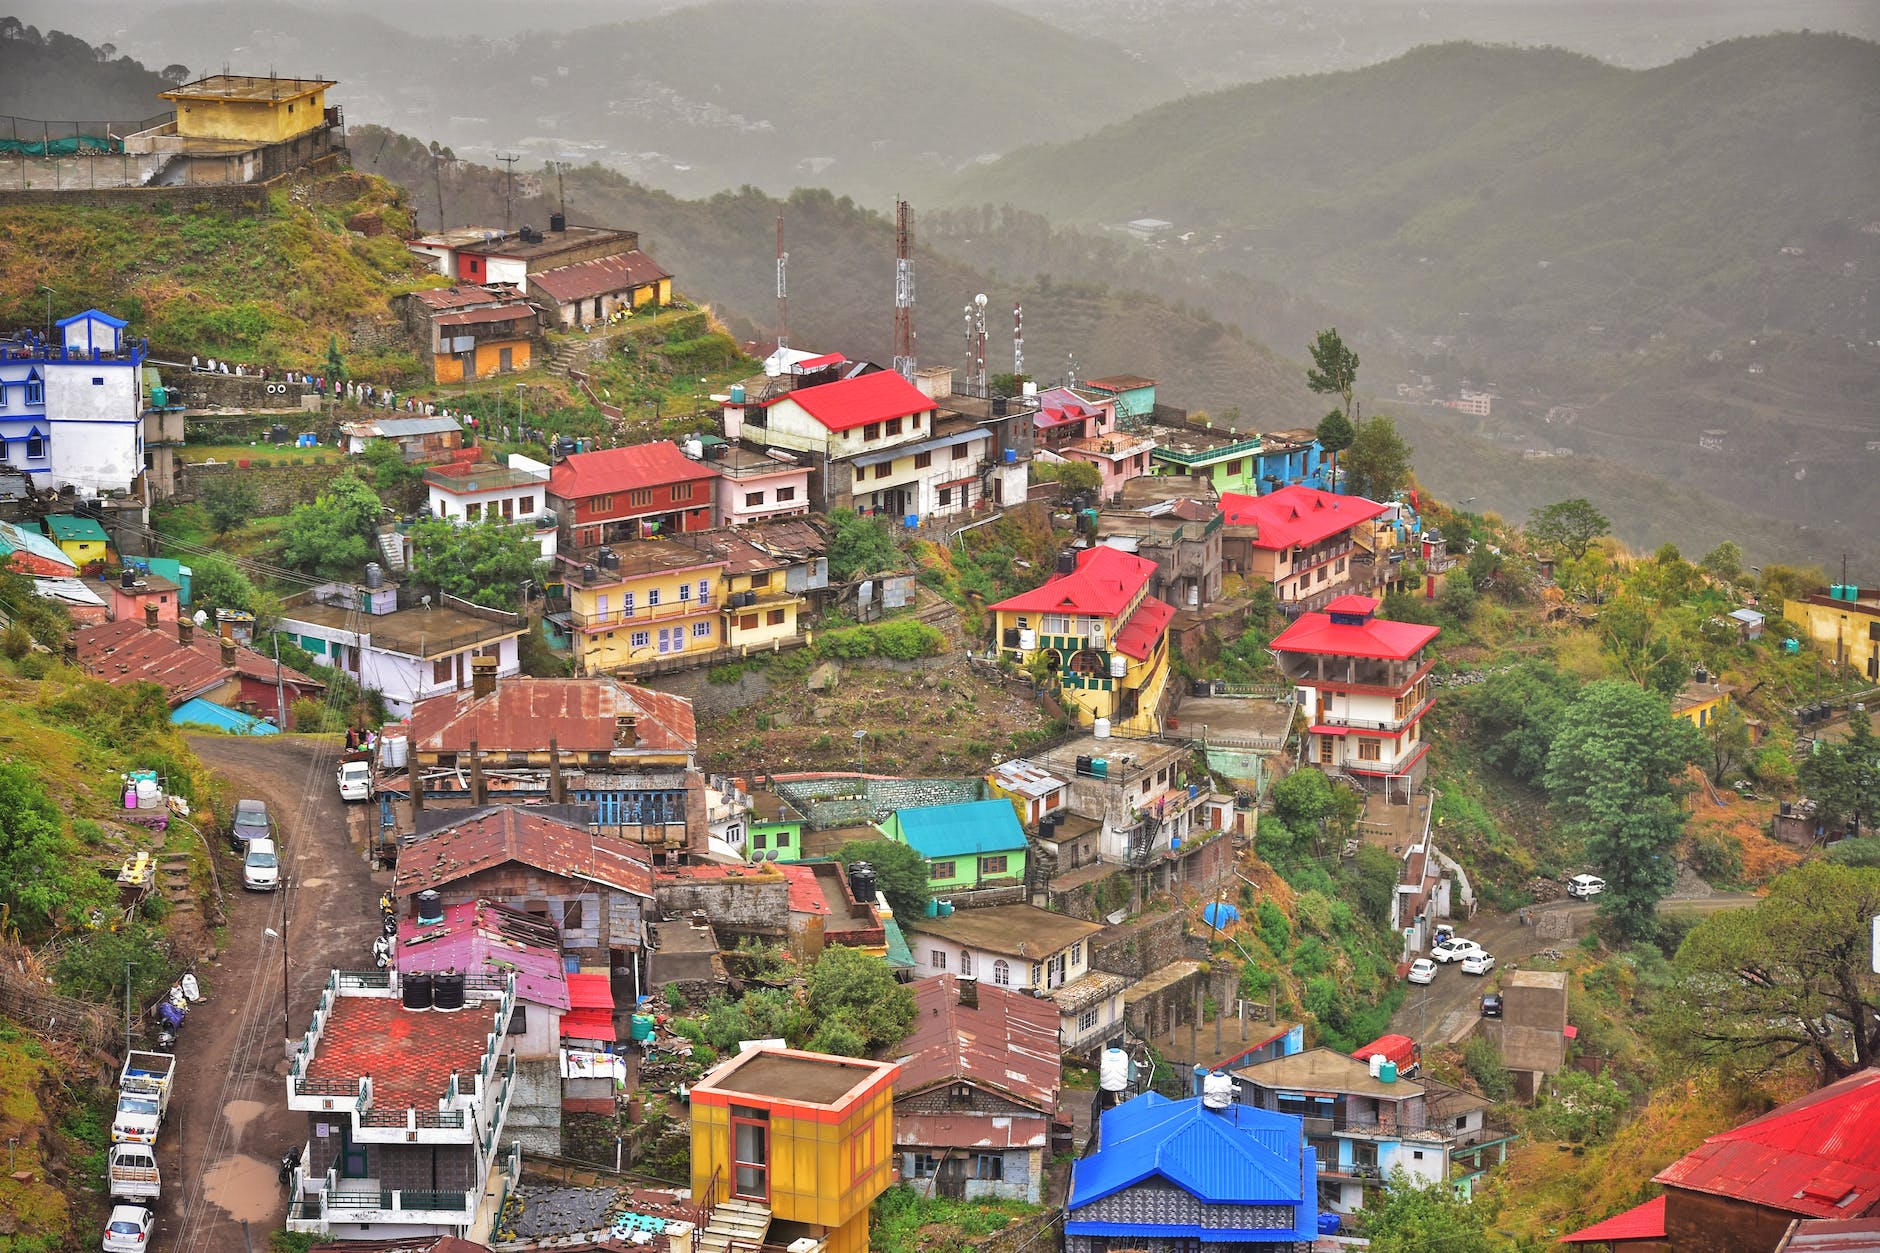 aerial view of houses on mountain